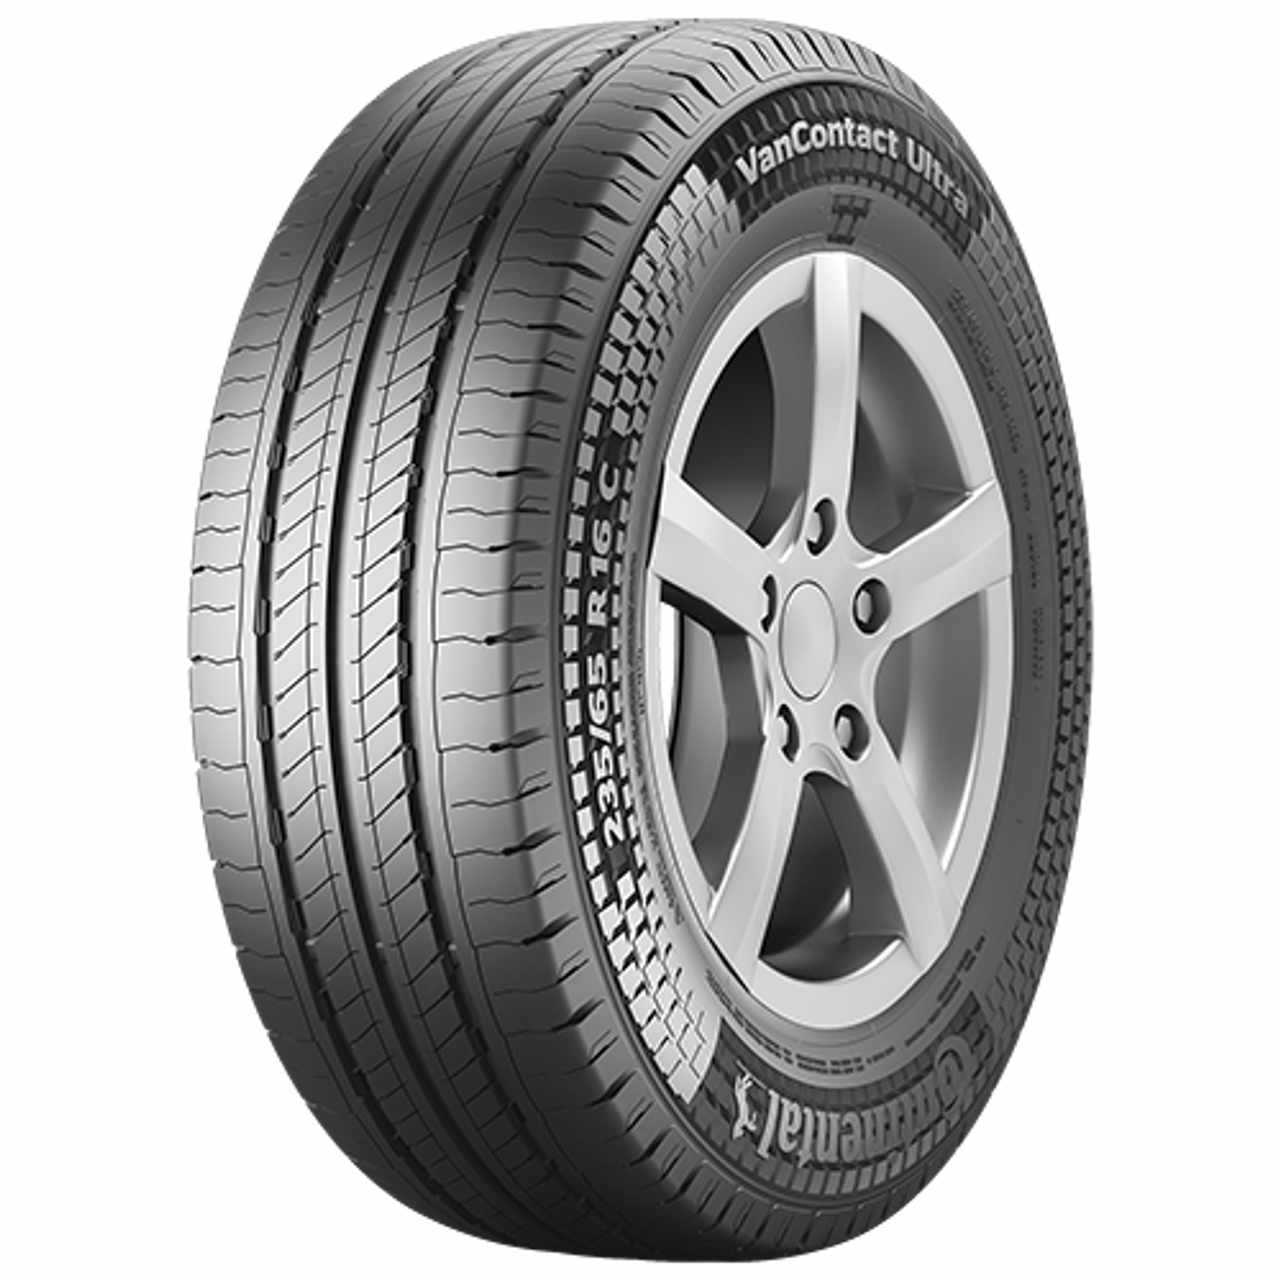 CONTINENTAL VANCONTACT ULTRA 215/65R16C 106T BSW